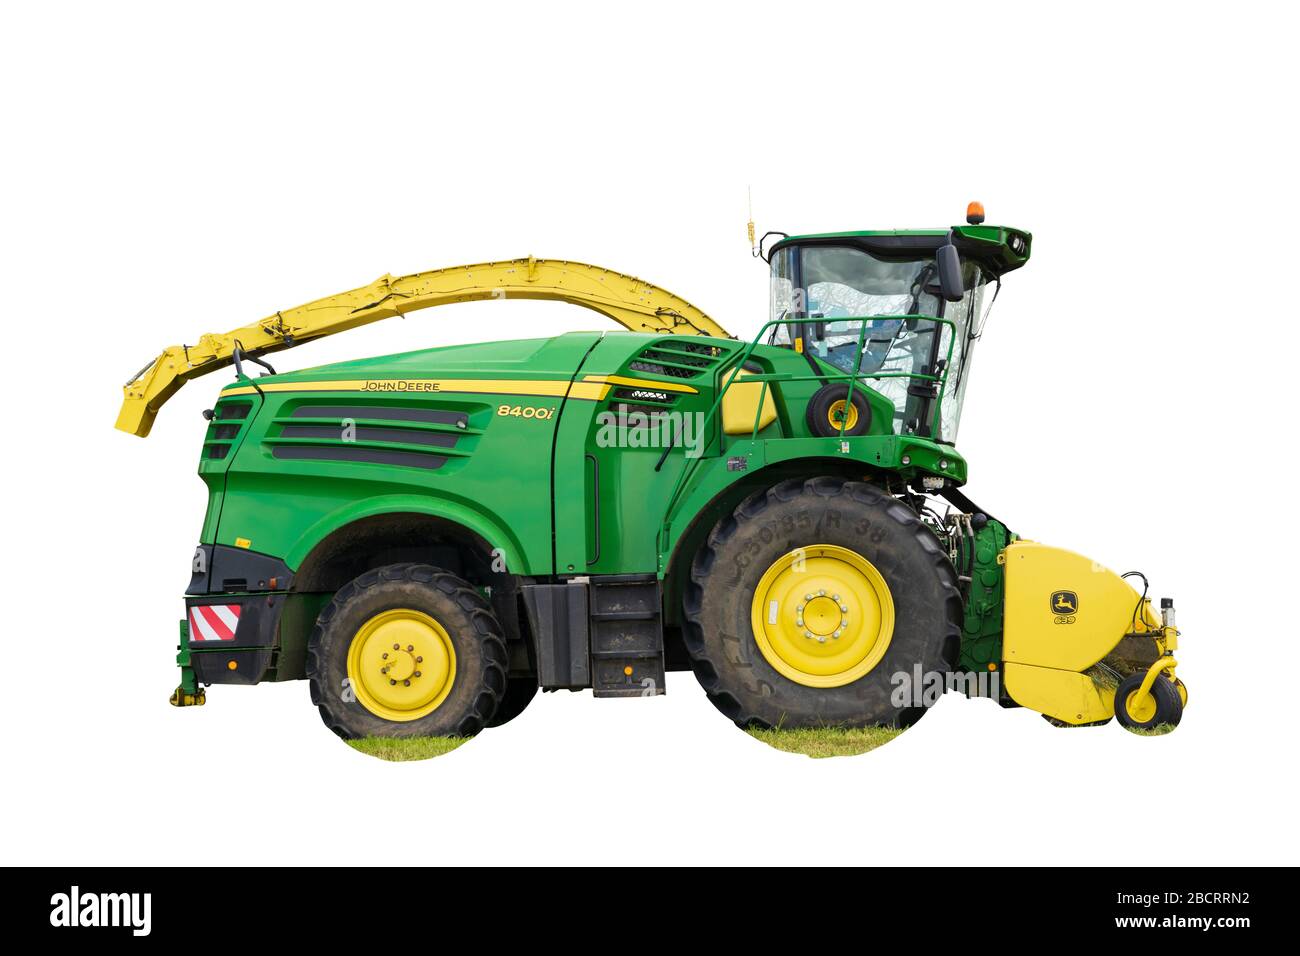 Green John Deere 8400i Self-propelled forage harvester cut-out from background. Green Tye, Much Hadham, Hertfordshire. UK Stock Photo